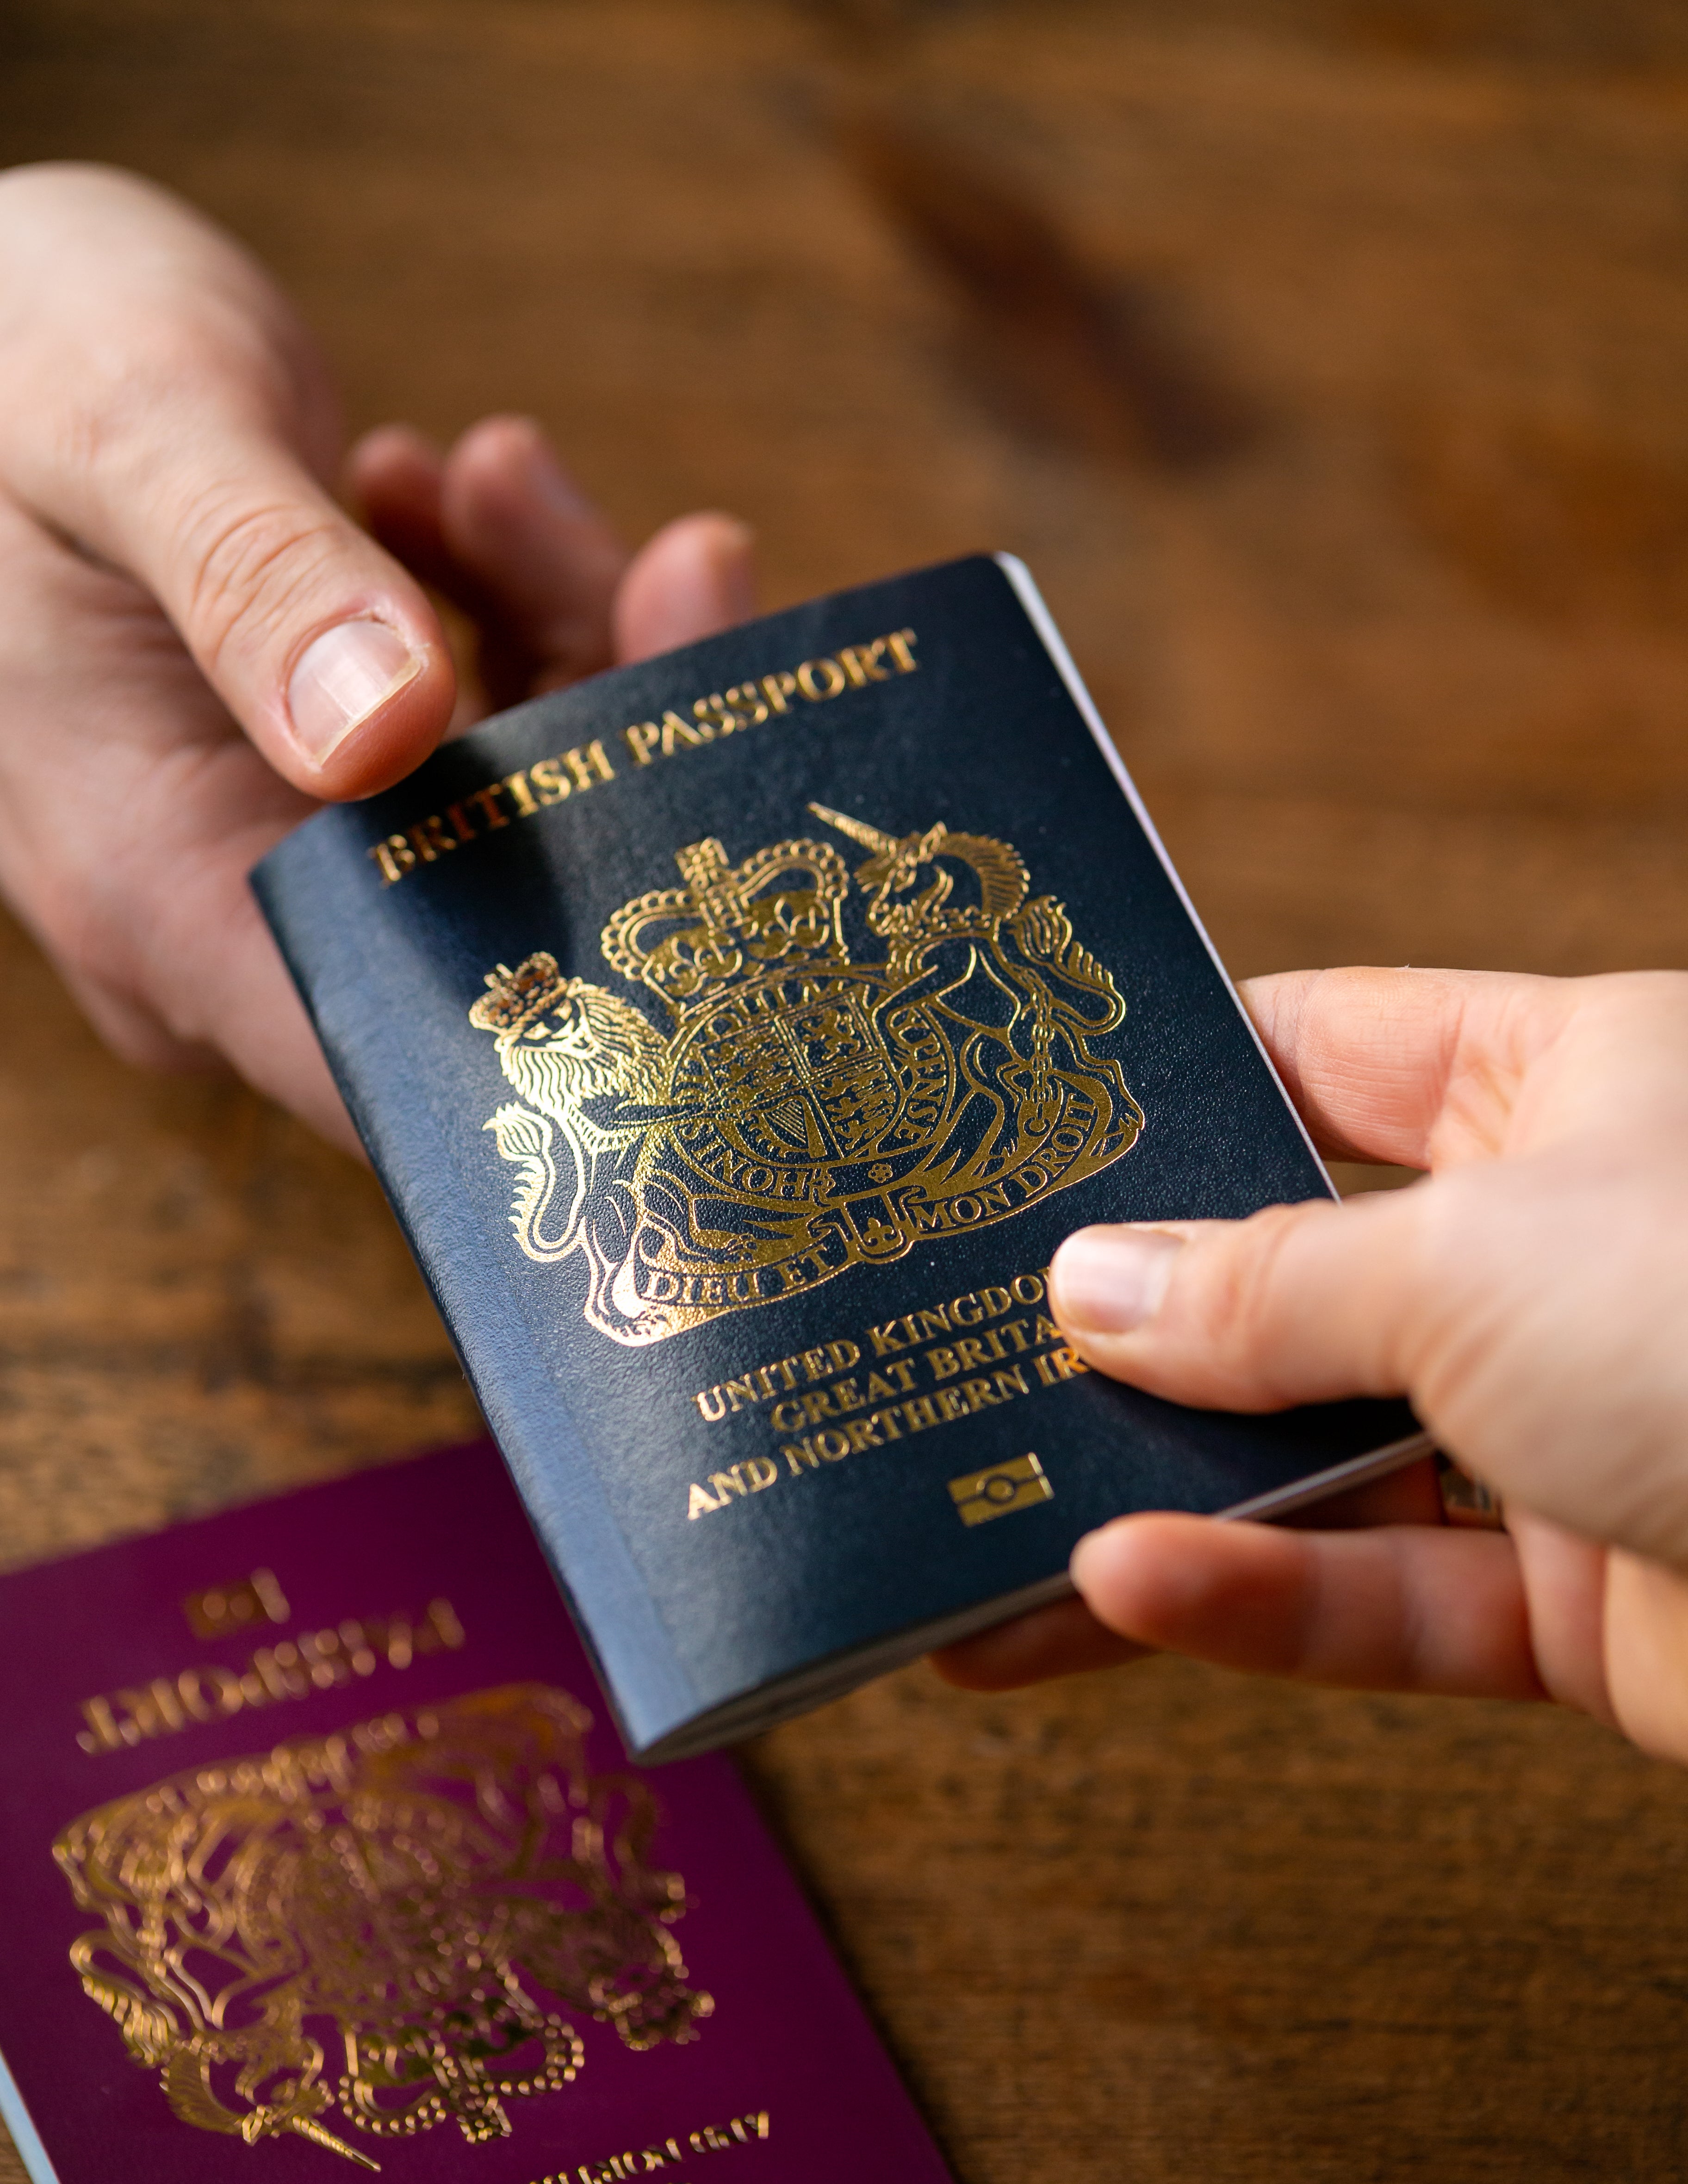 The cost of an adult passport will rise to £82.50